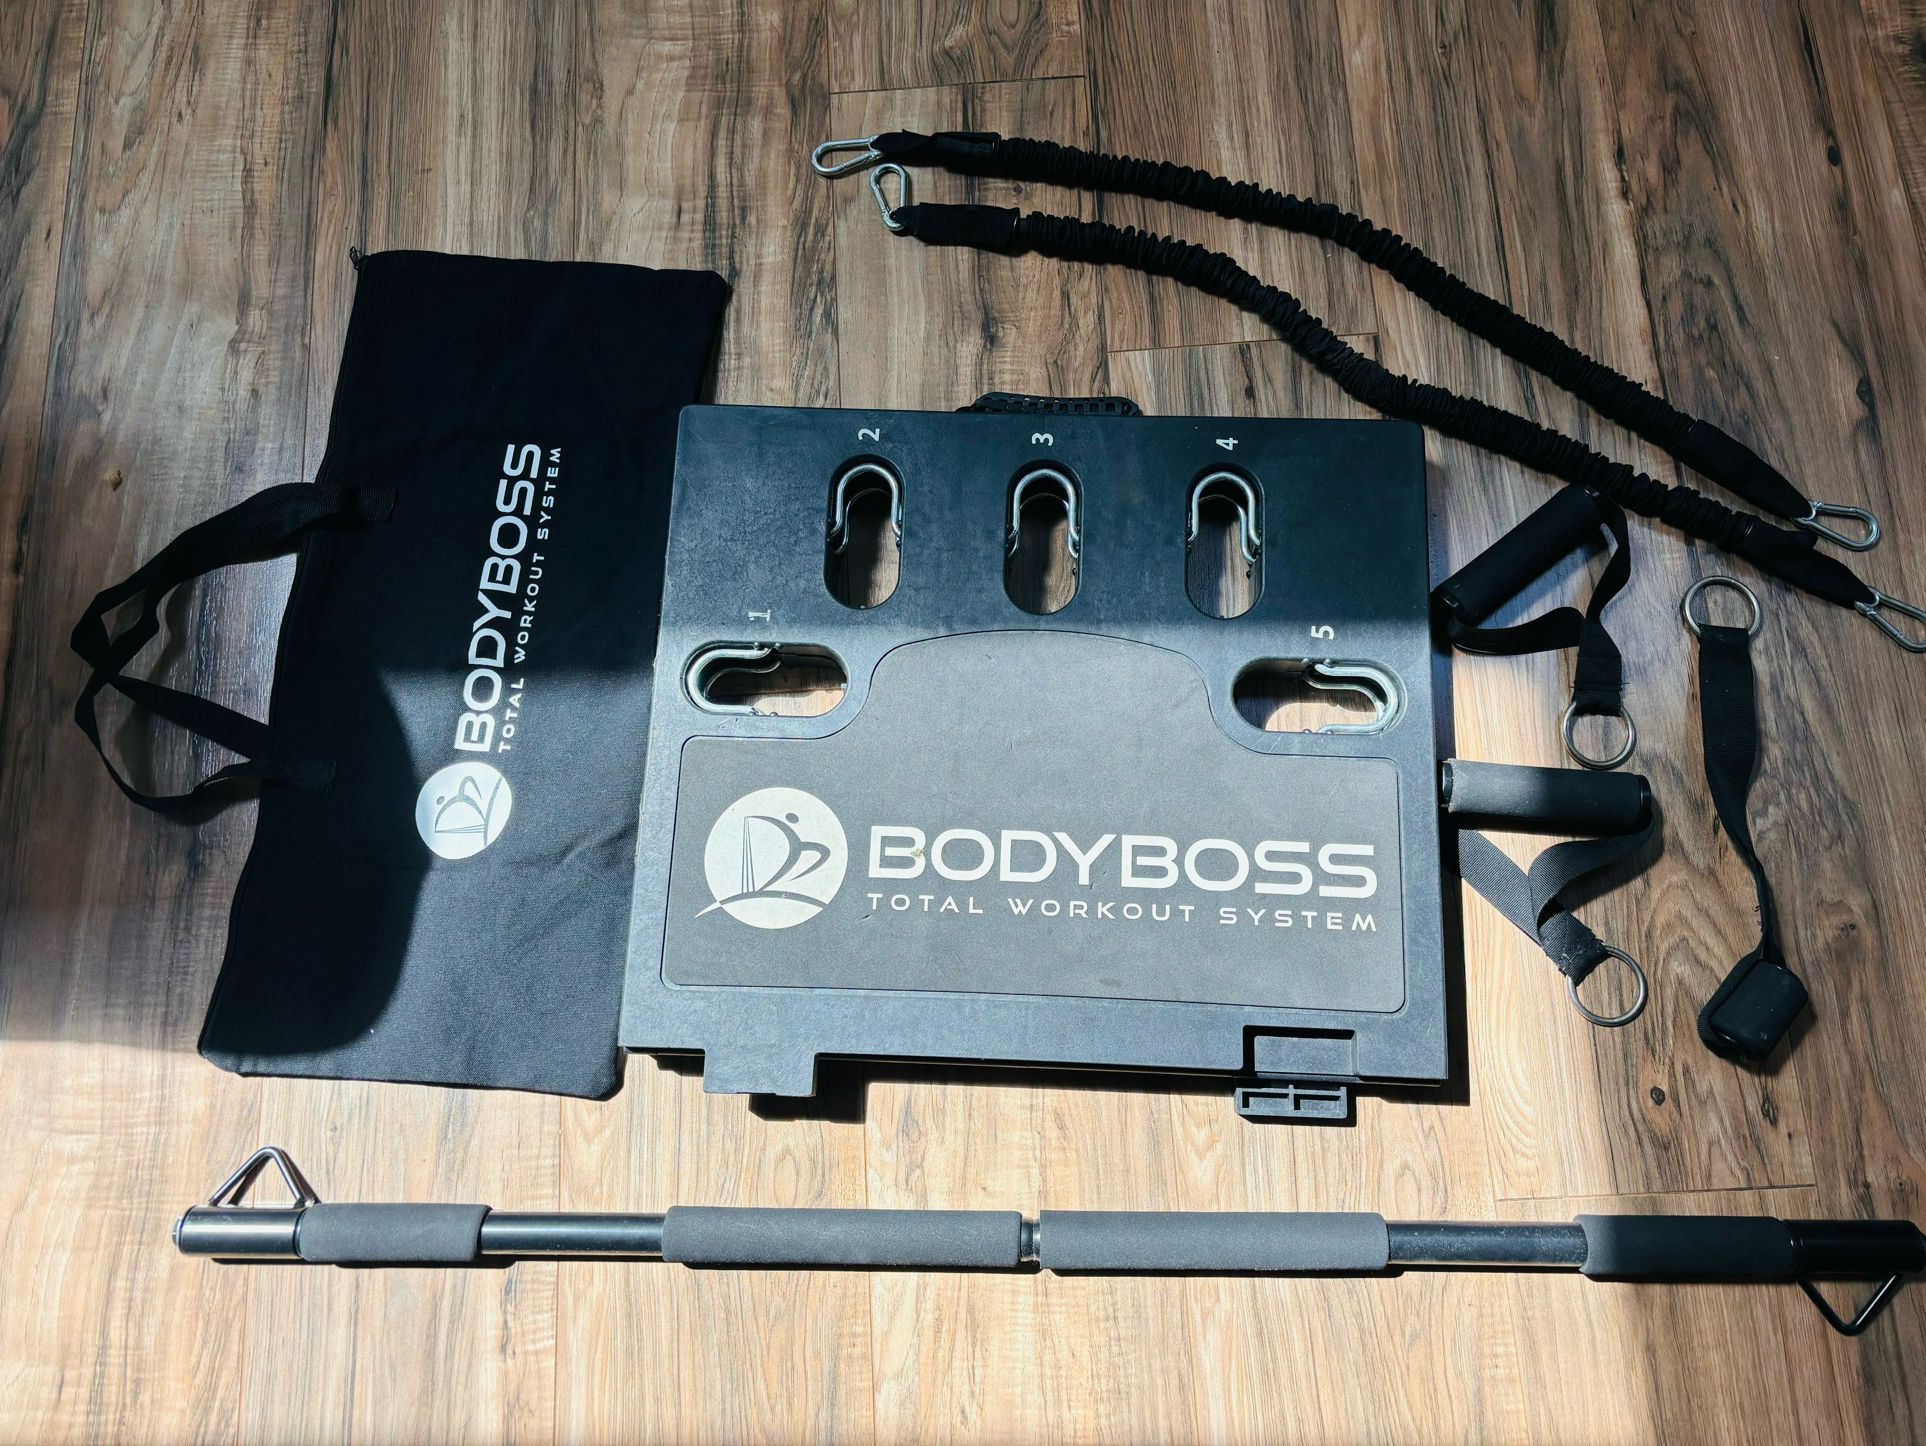 Bodyboss Total Workout System